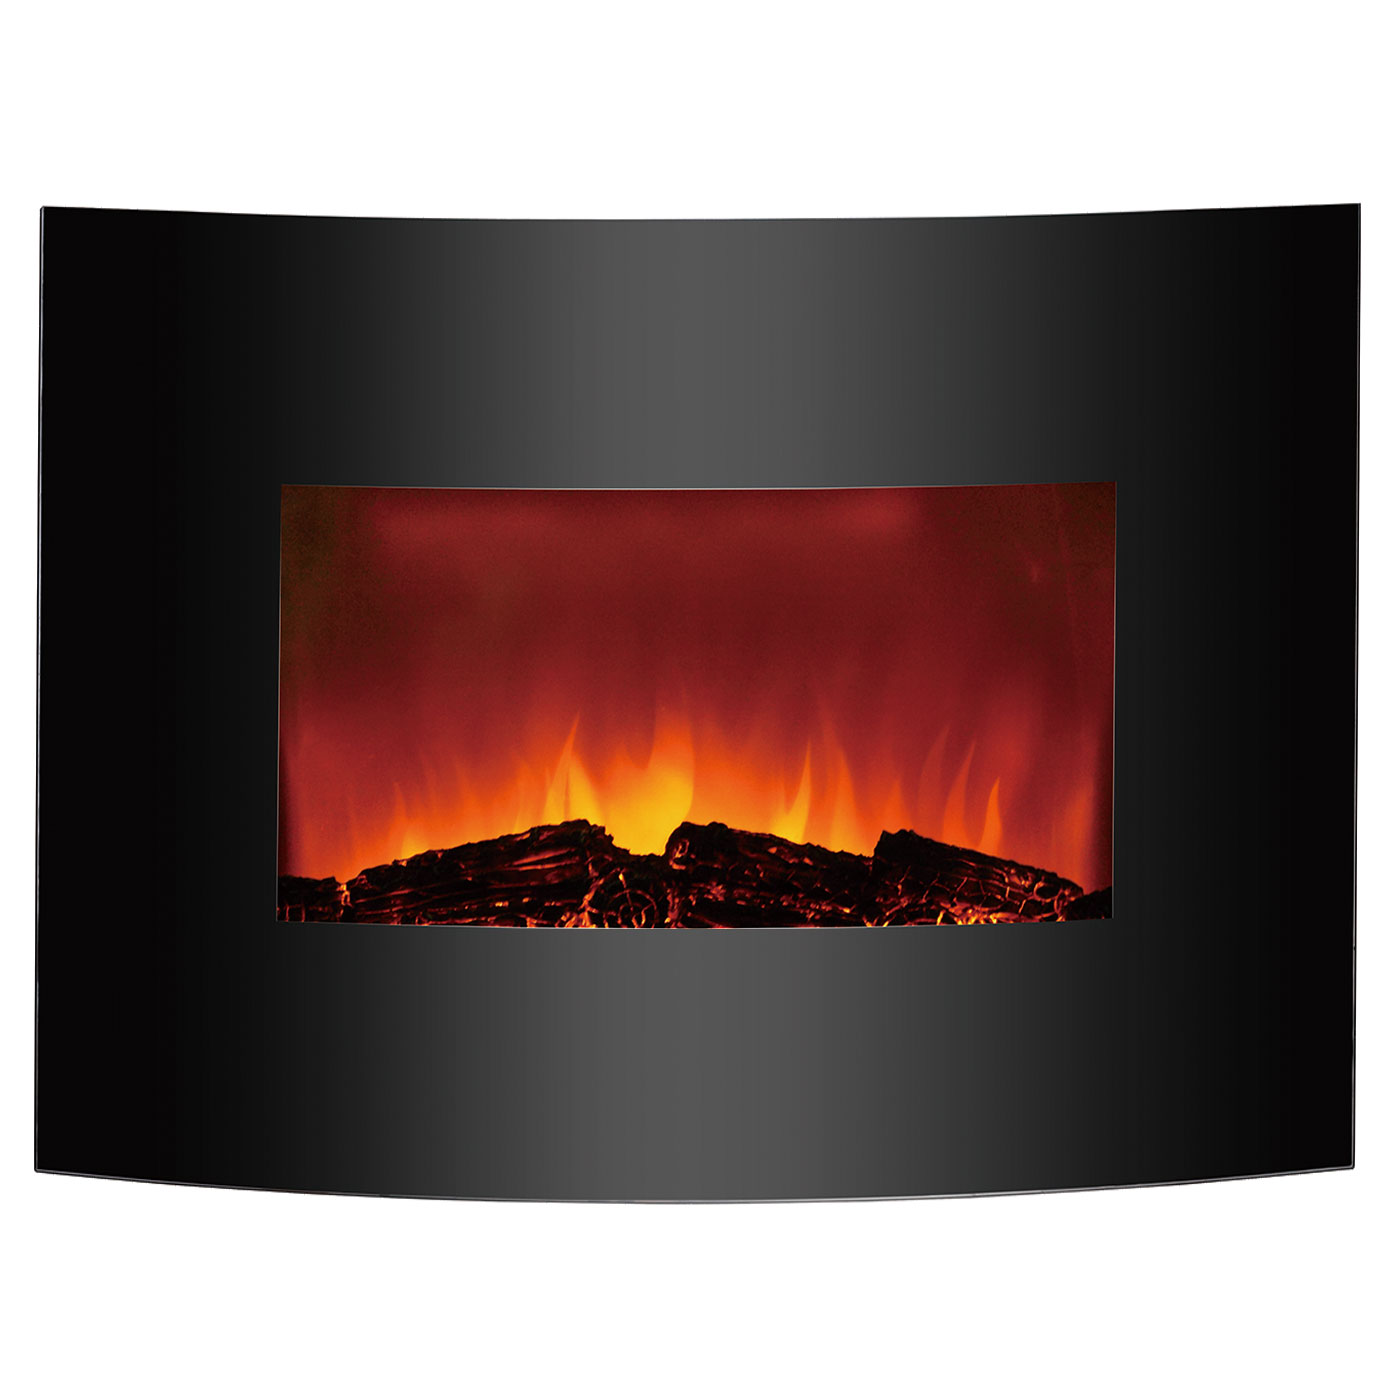 Curved Electrical Fireplace with 2 heat settings,remote control